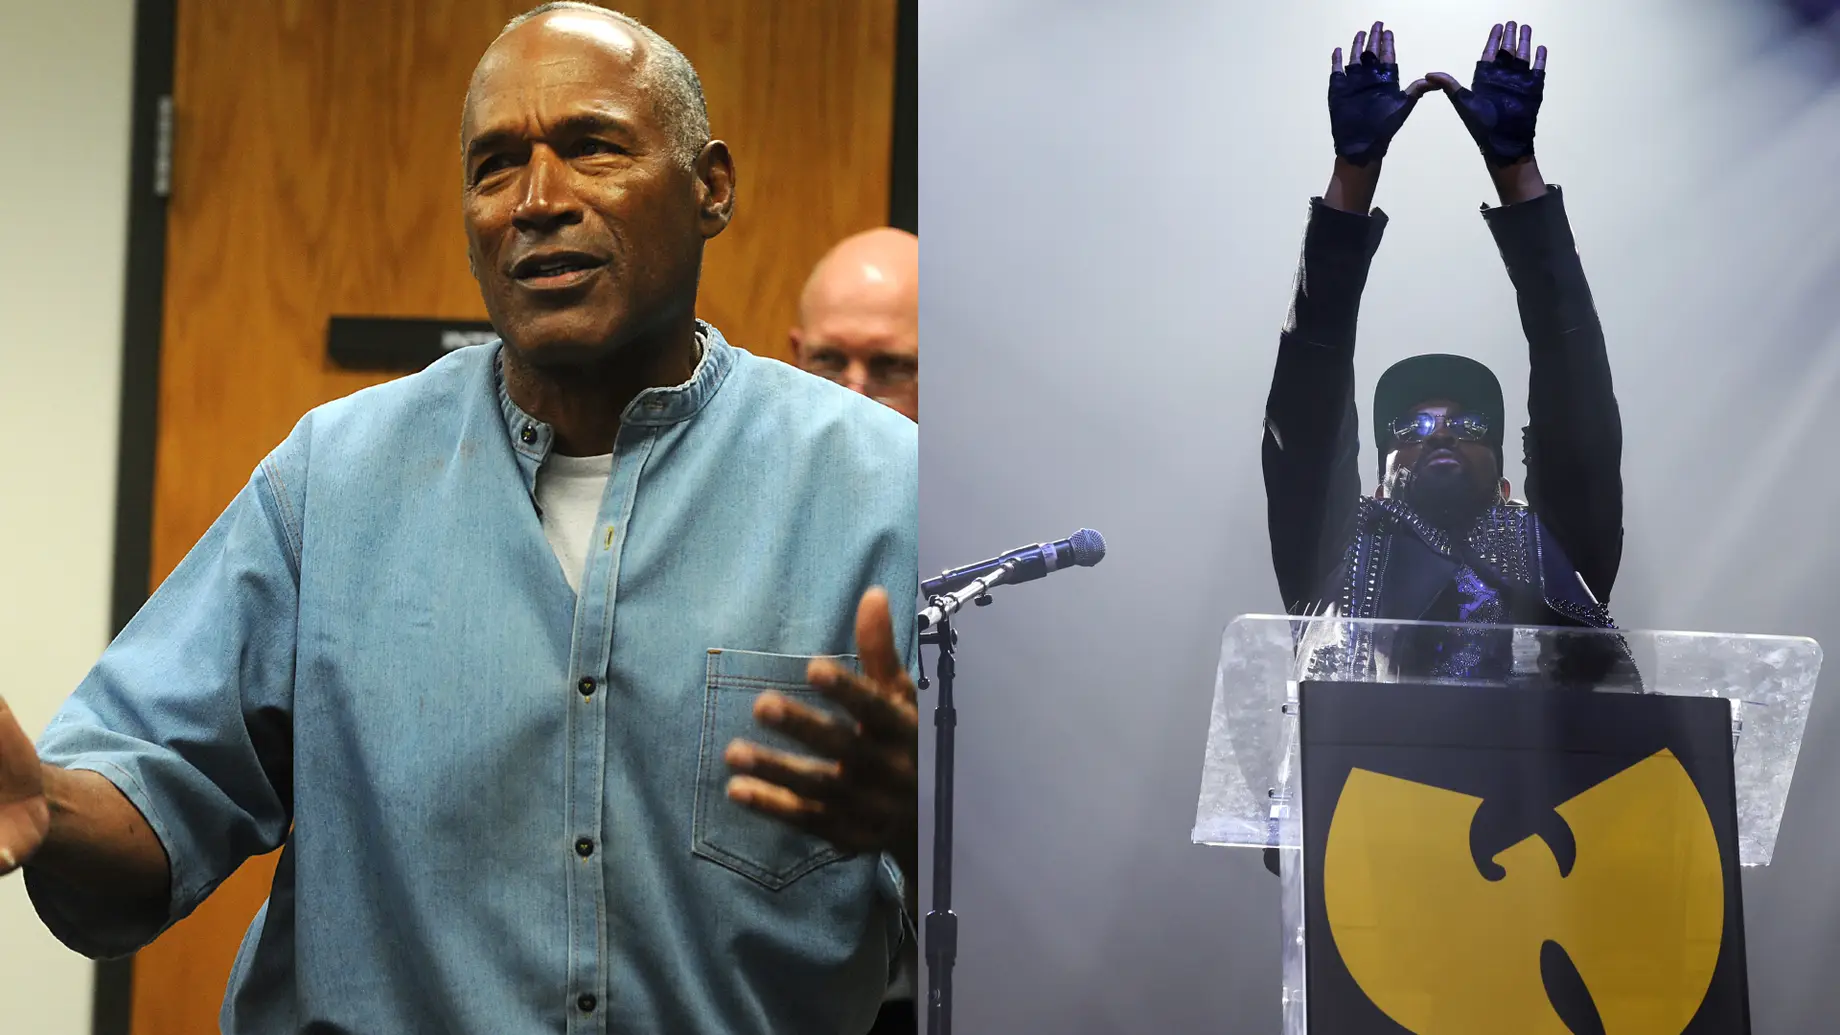 O.J. Simpson Thought He Was in Hell When He Woke Up From Surgery to the Sounds of Wu-Tang Clan [Video]